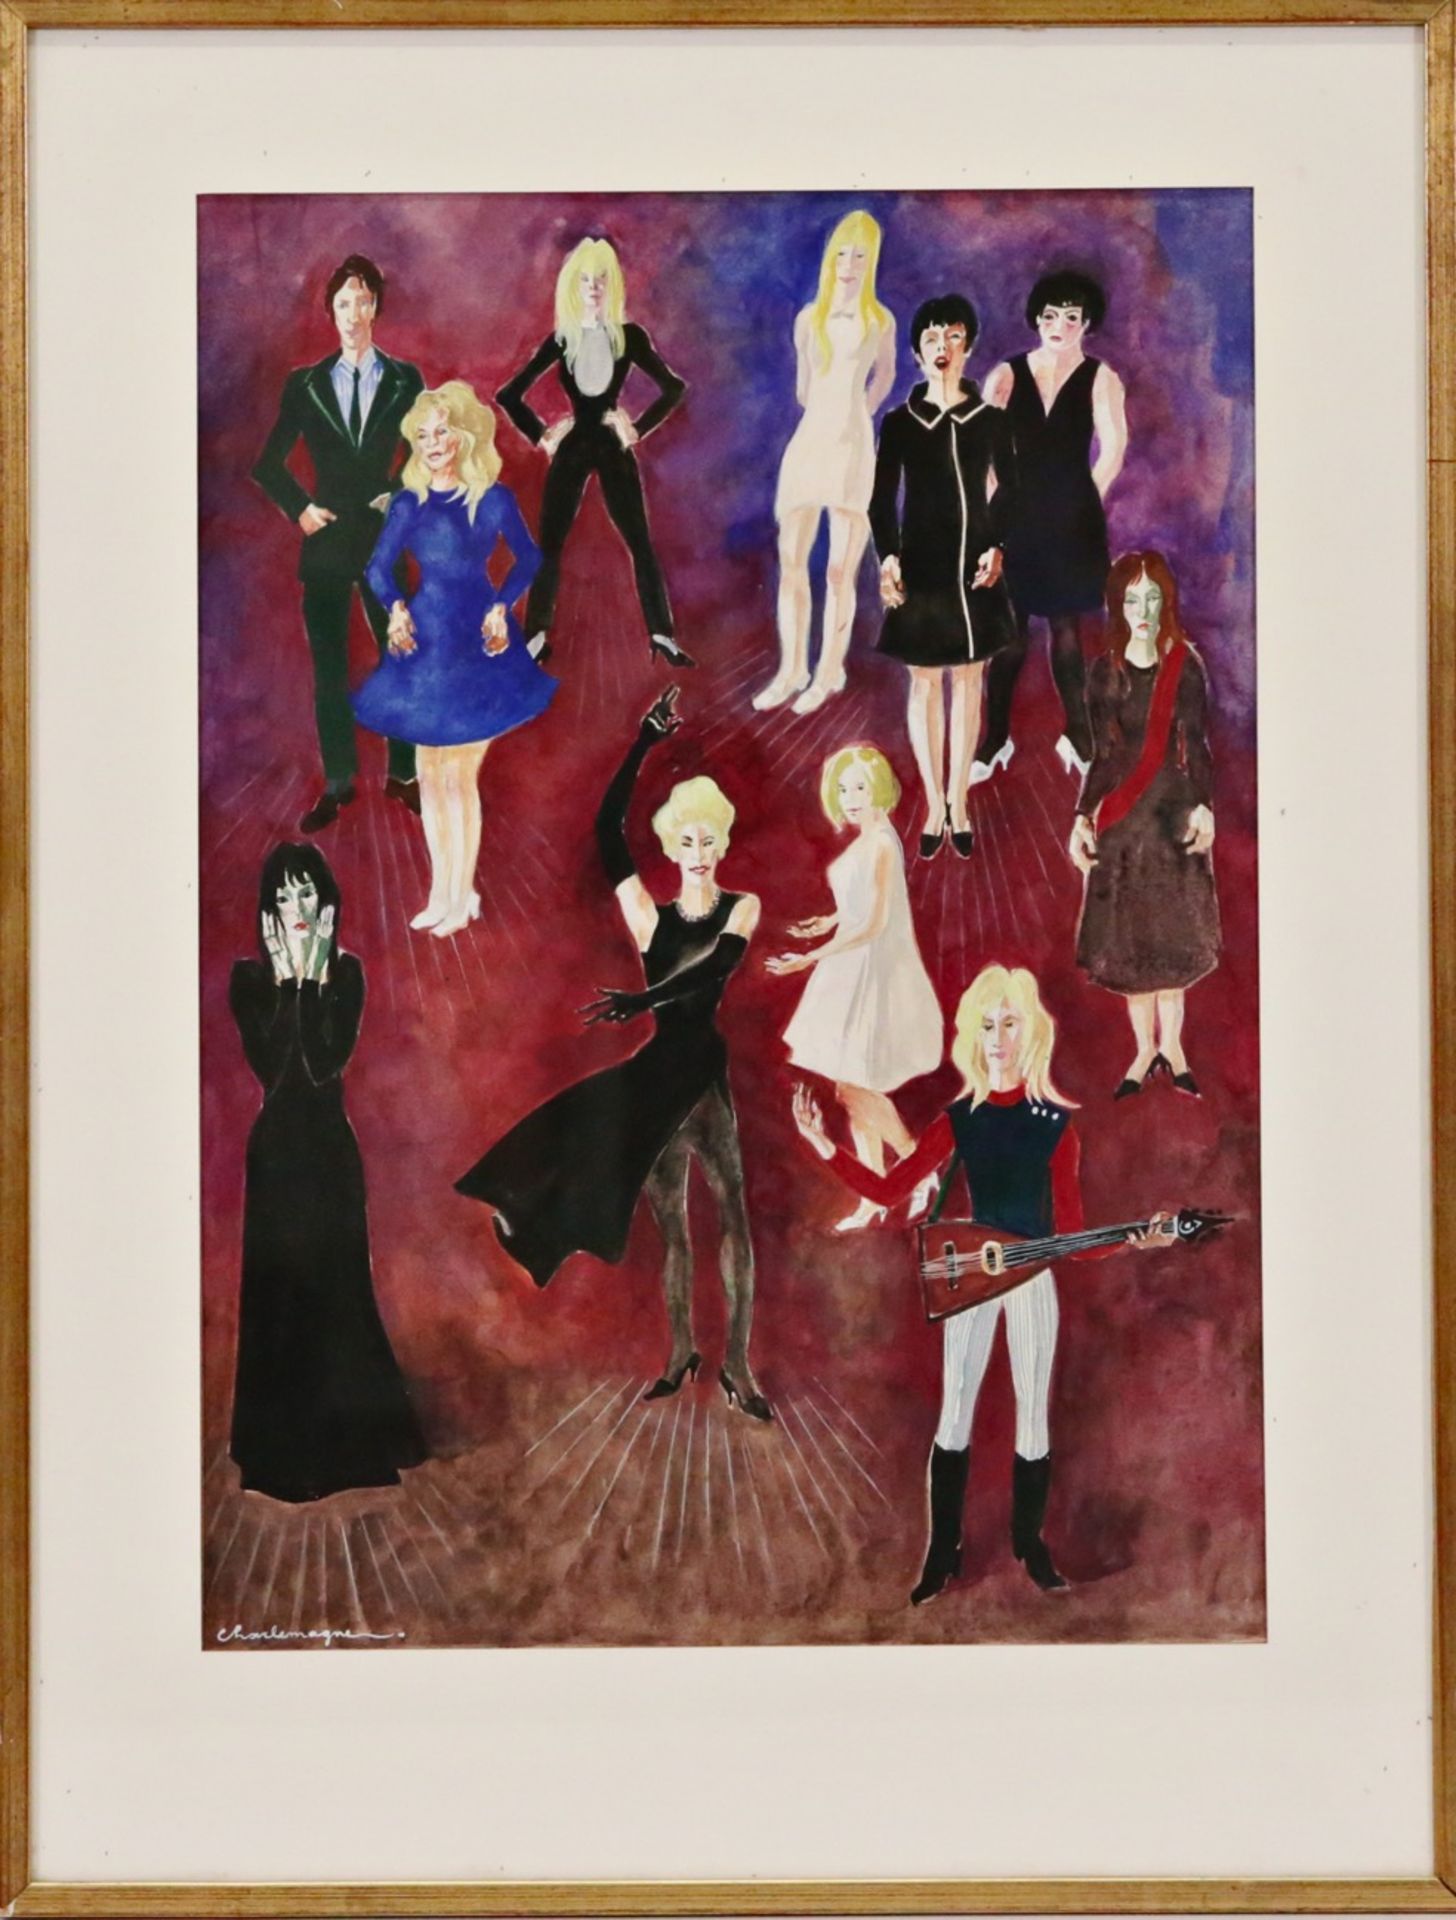 ÒCelebritiesÓ gouache on paper, signature illegible, French painting of the 20th century. - Image 2 of 5